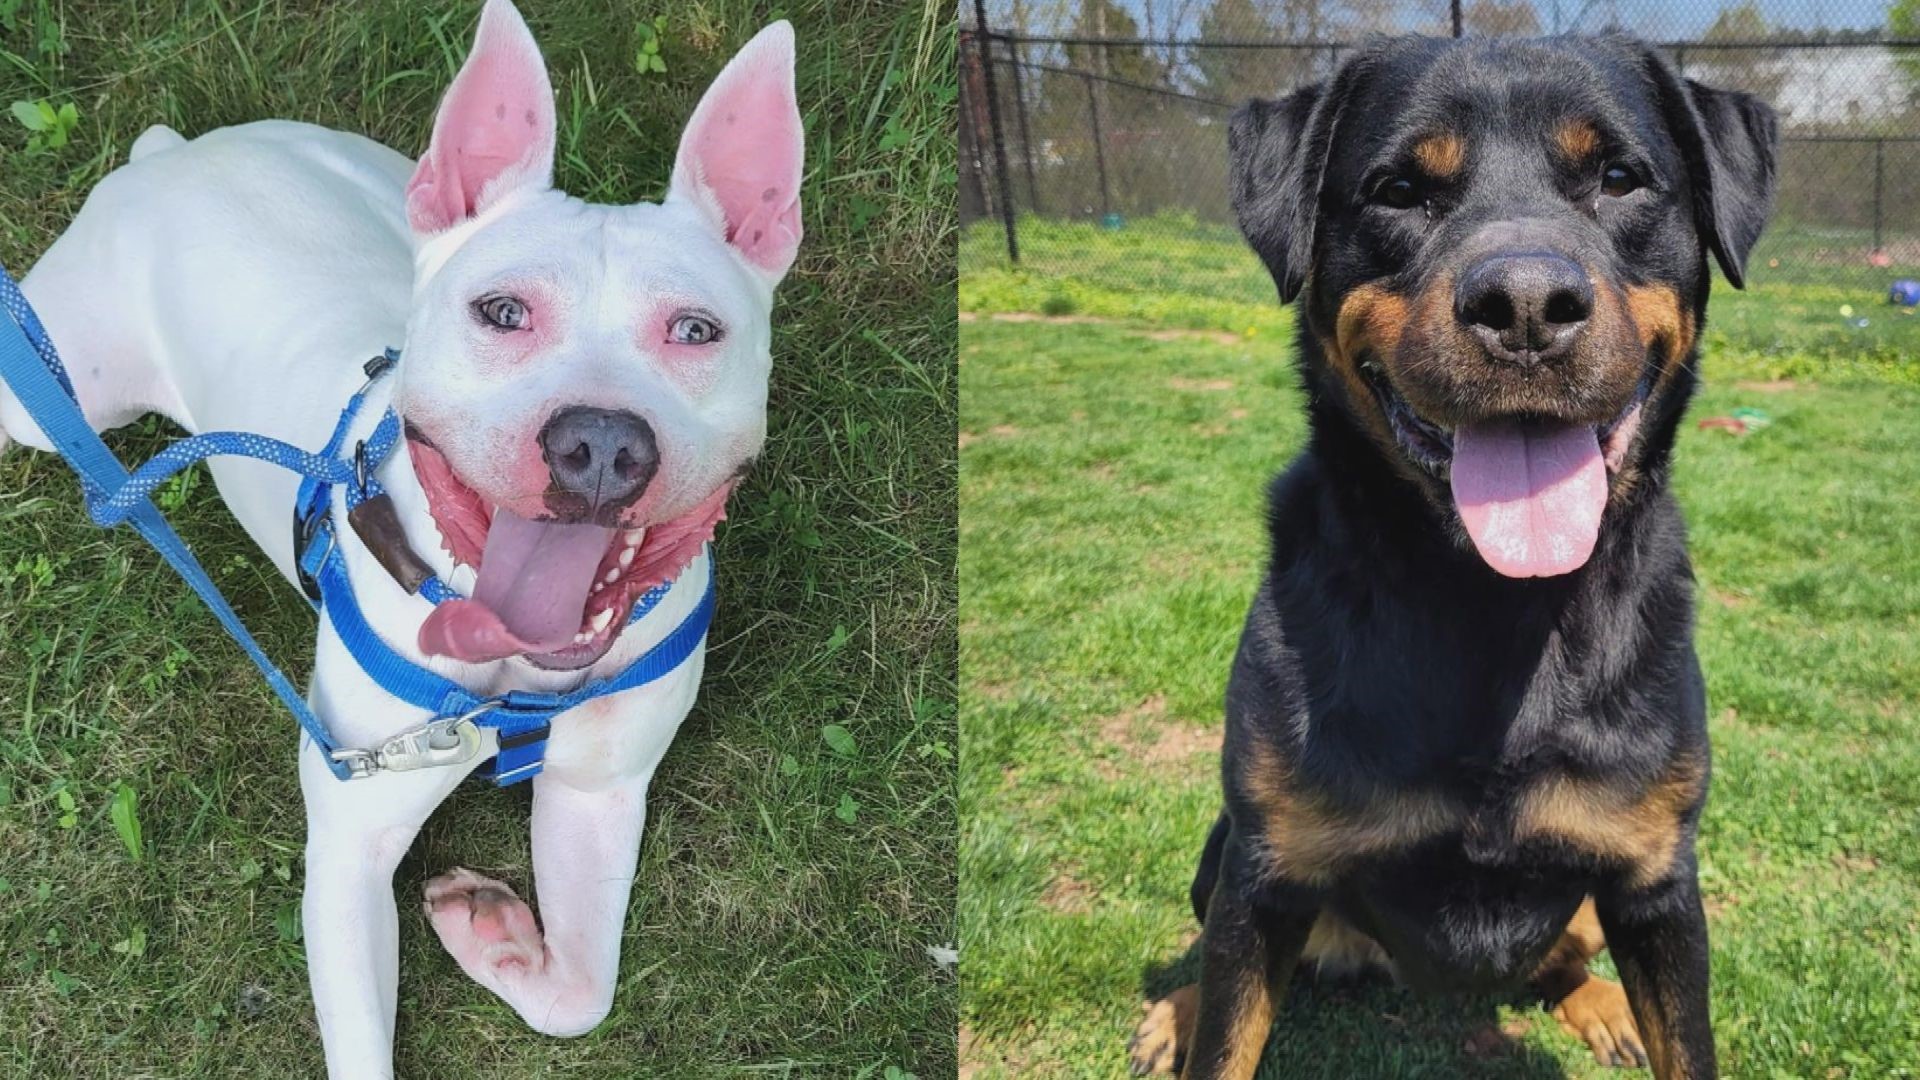 Ghost and Gretel are longtime residents at the York County SPCA and are looking to find their special families.